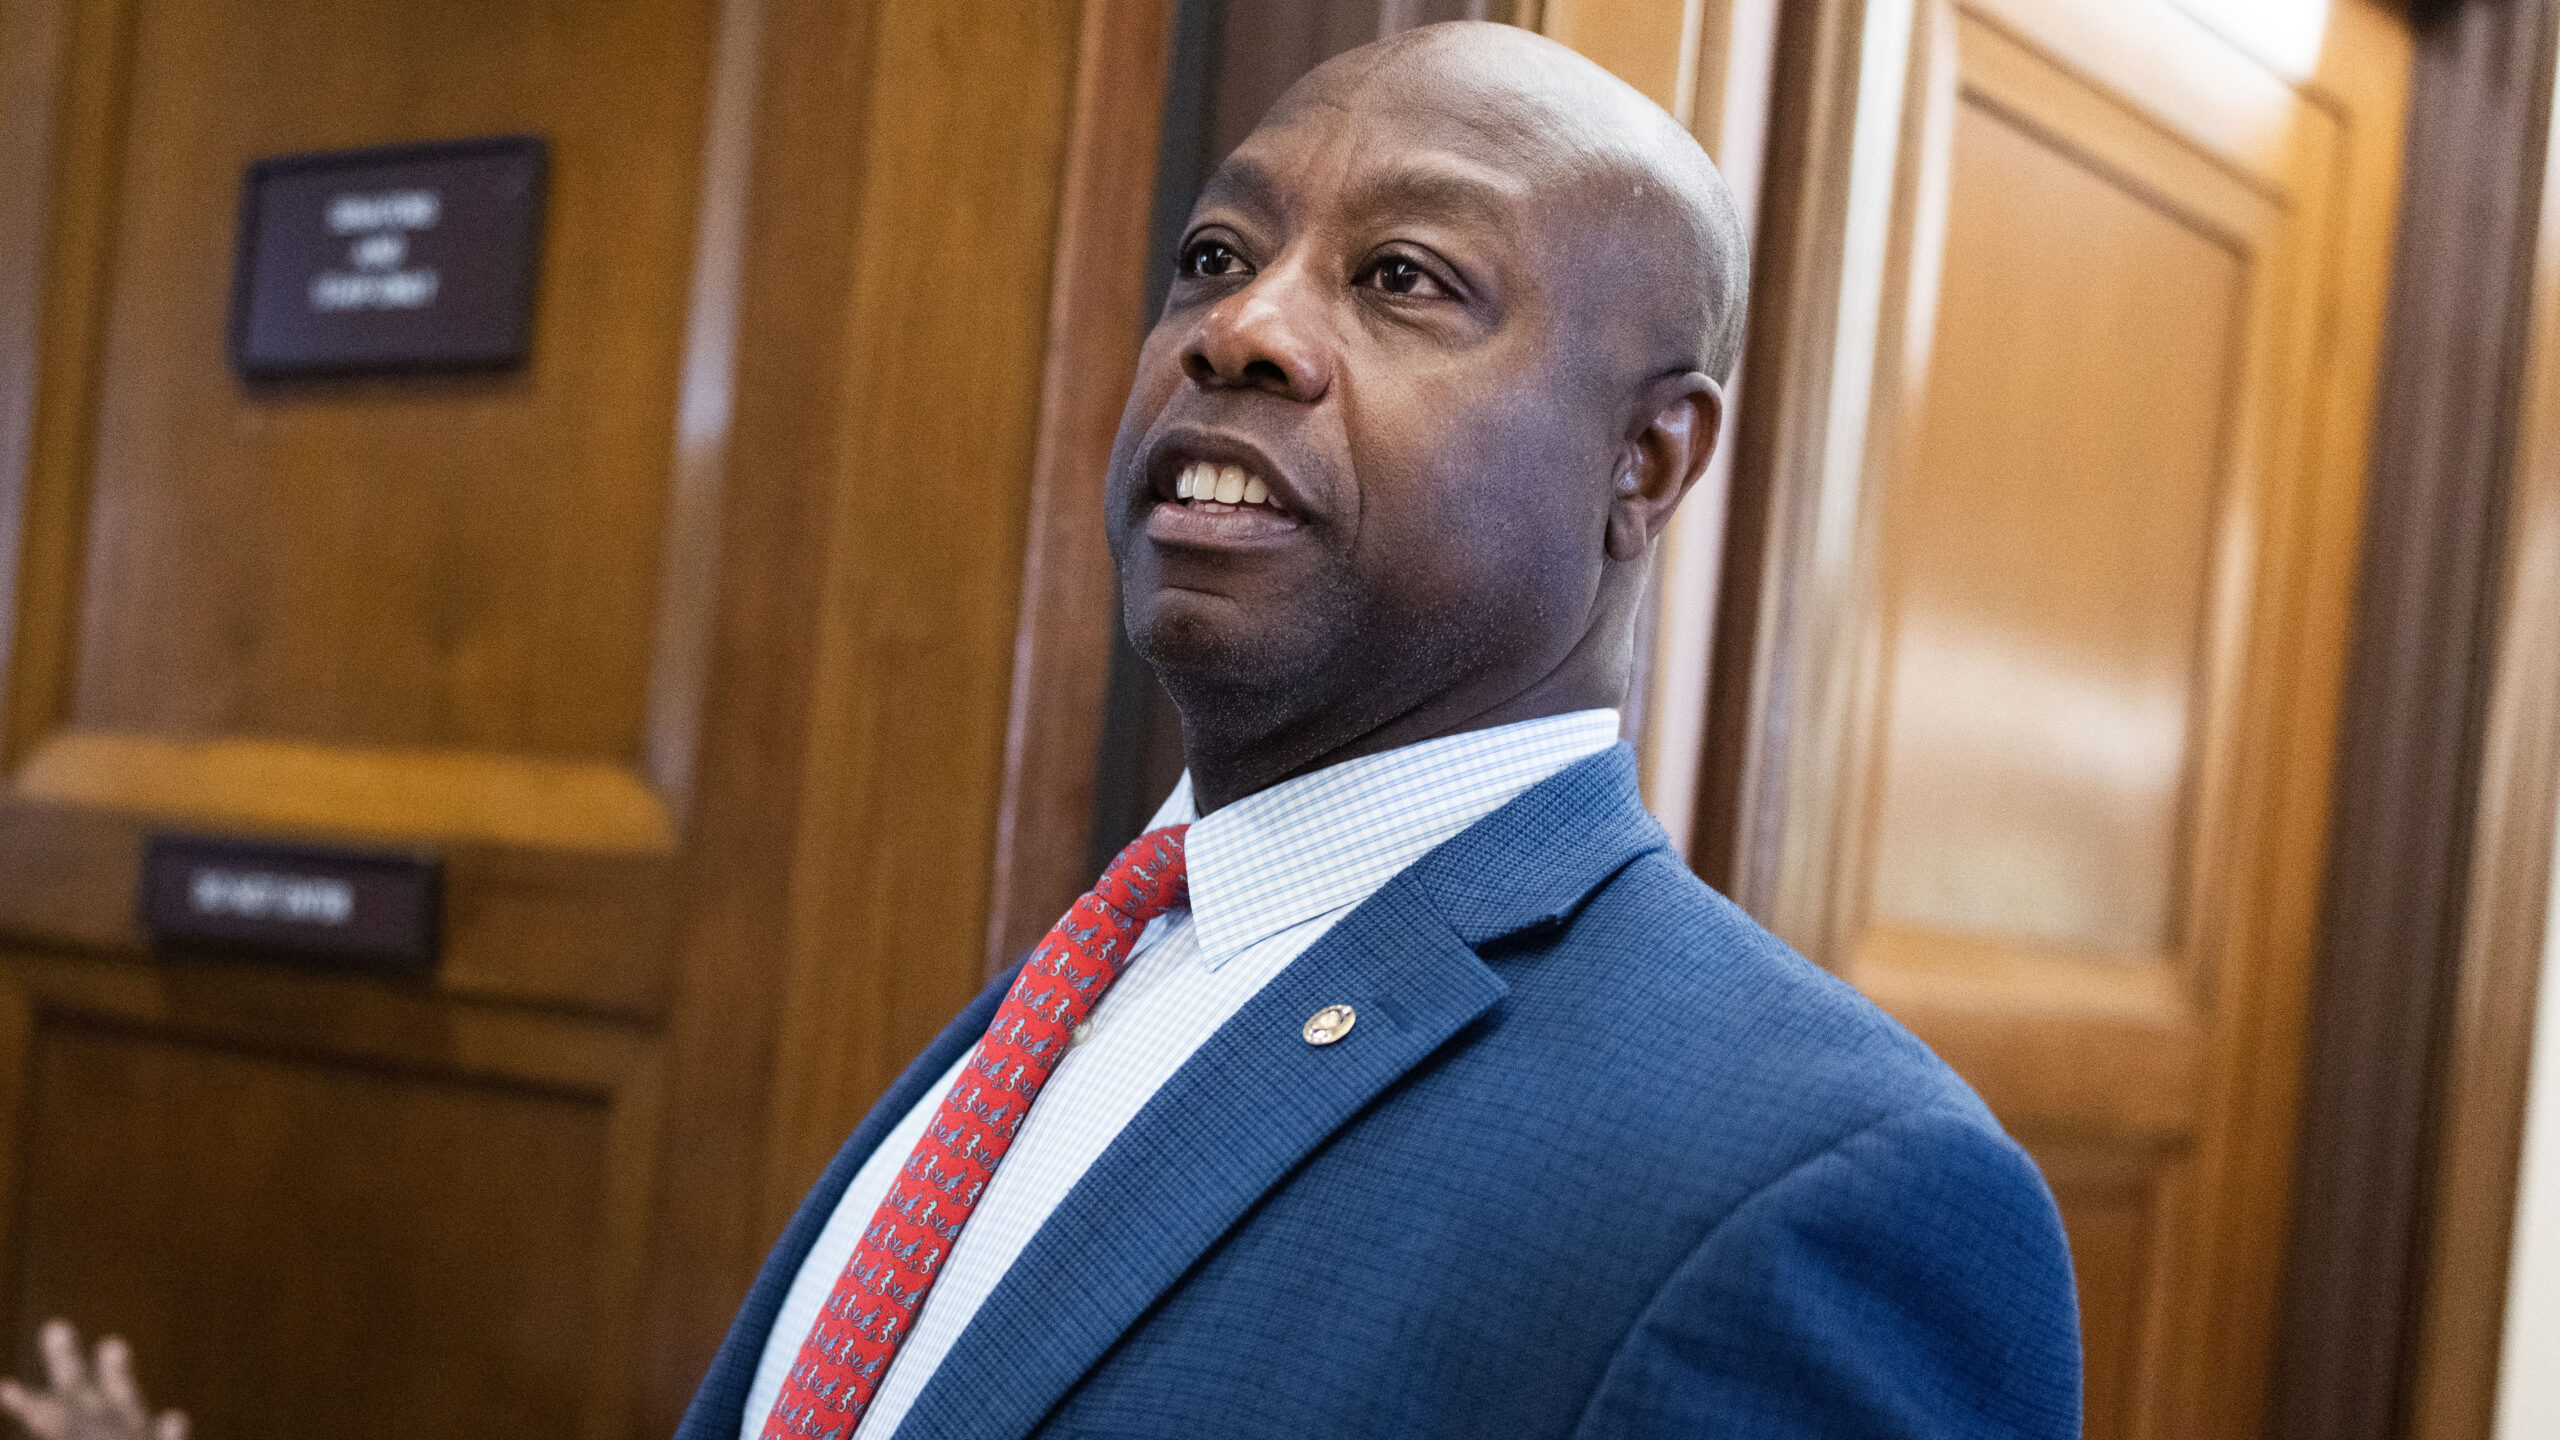 Tim Scott clarifies his relationship status amidst speculation about his unmarried status.